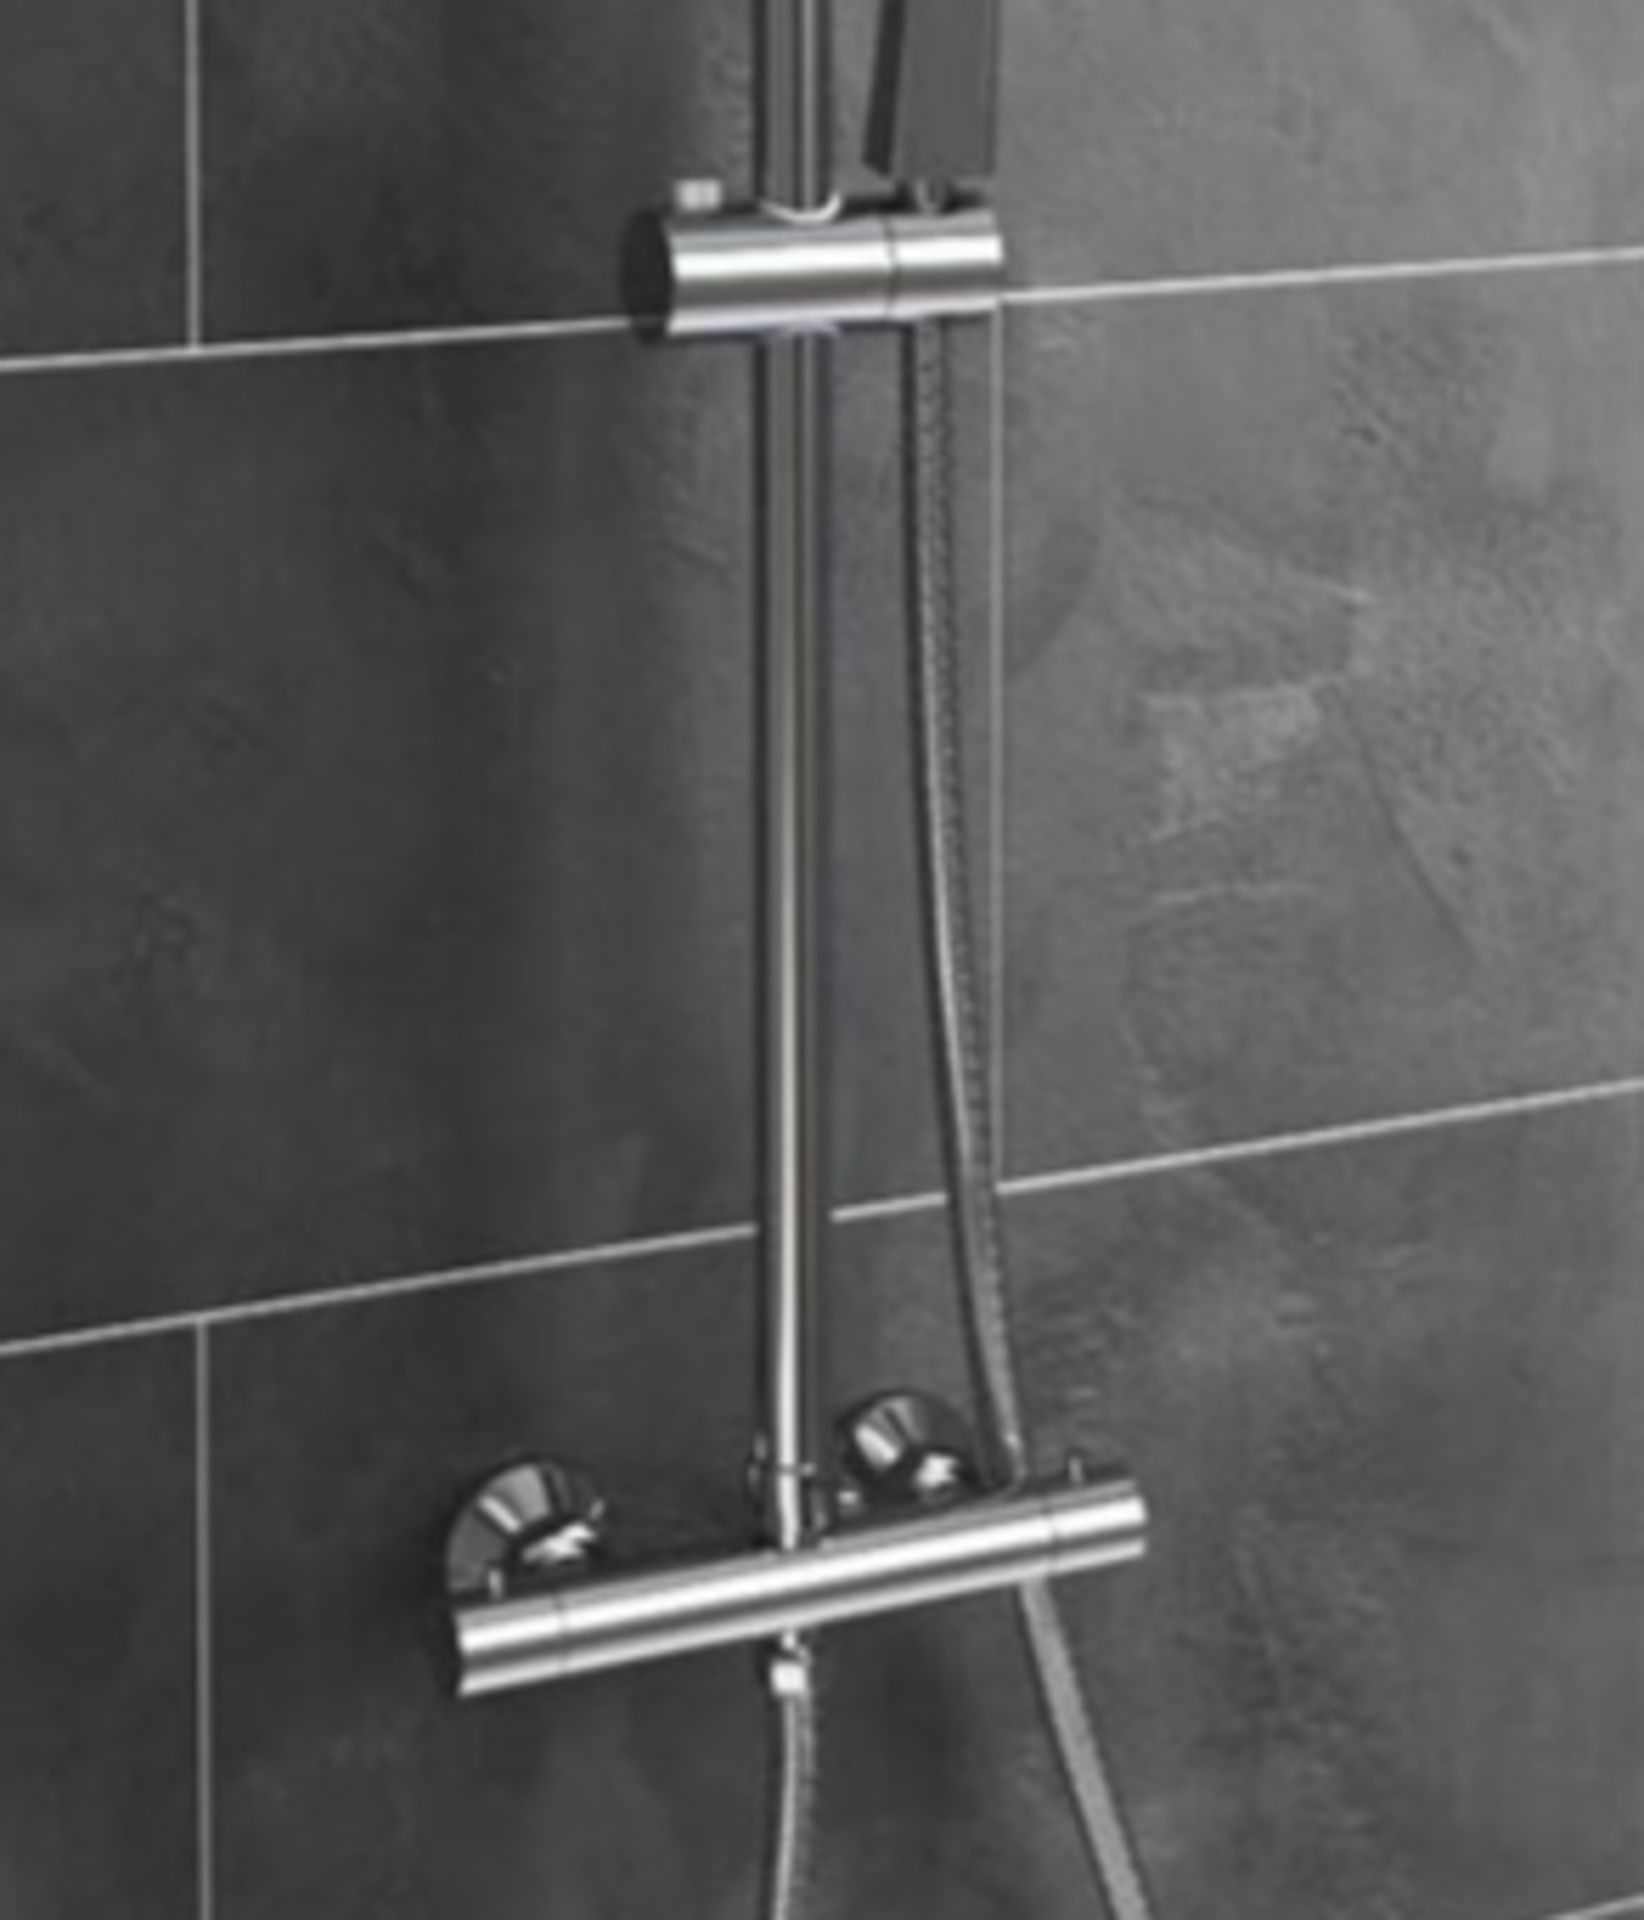 1 x Arley Ontario Thermostatic Shower Kit With Riser Rail, Shower Head and Handset - New - RRP £190 - Image 3 of 3